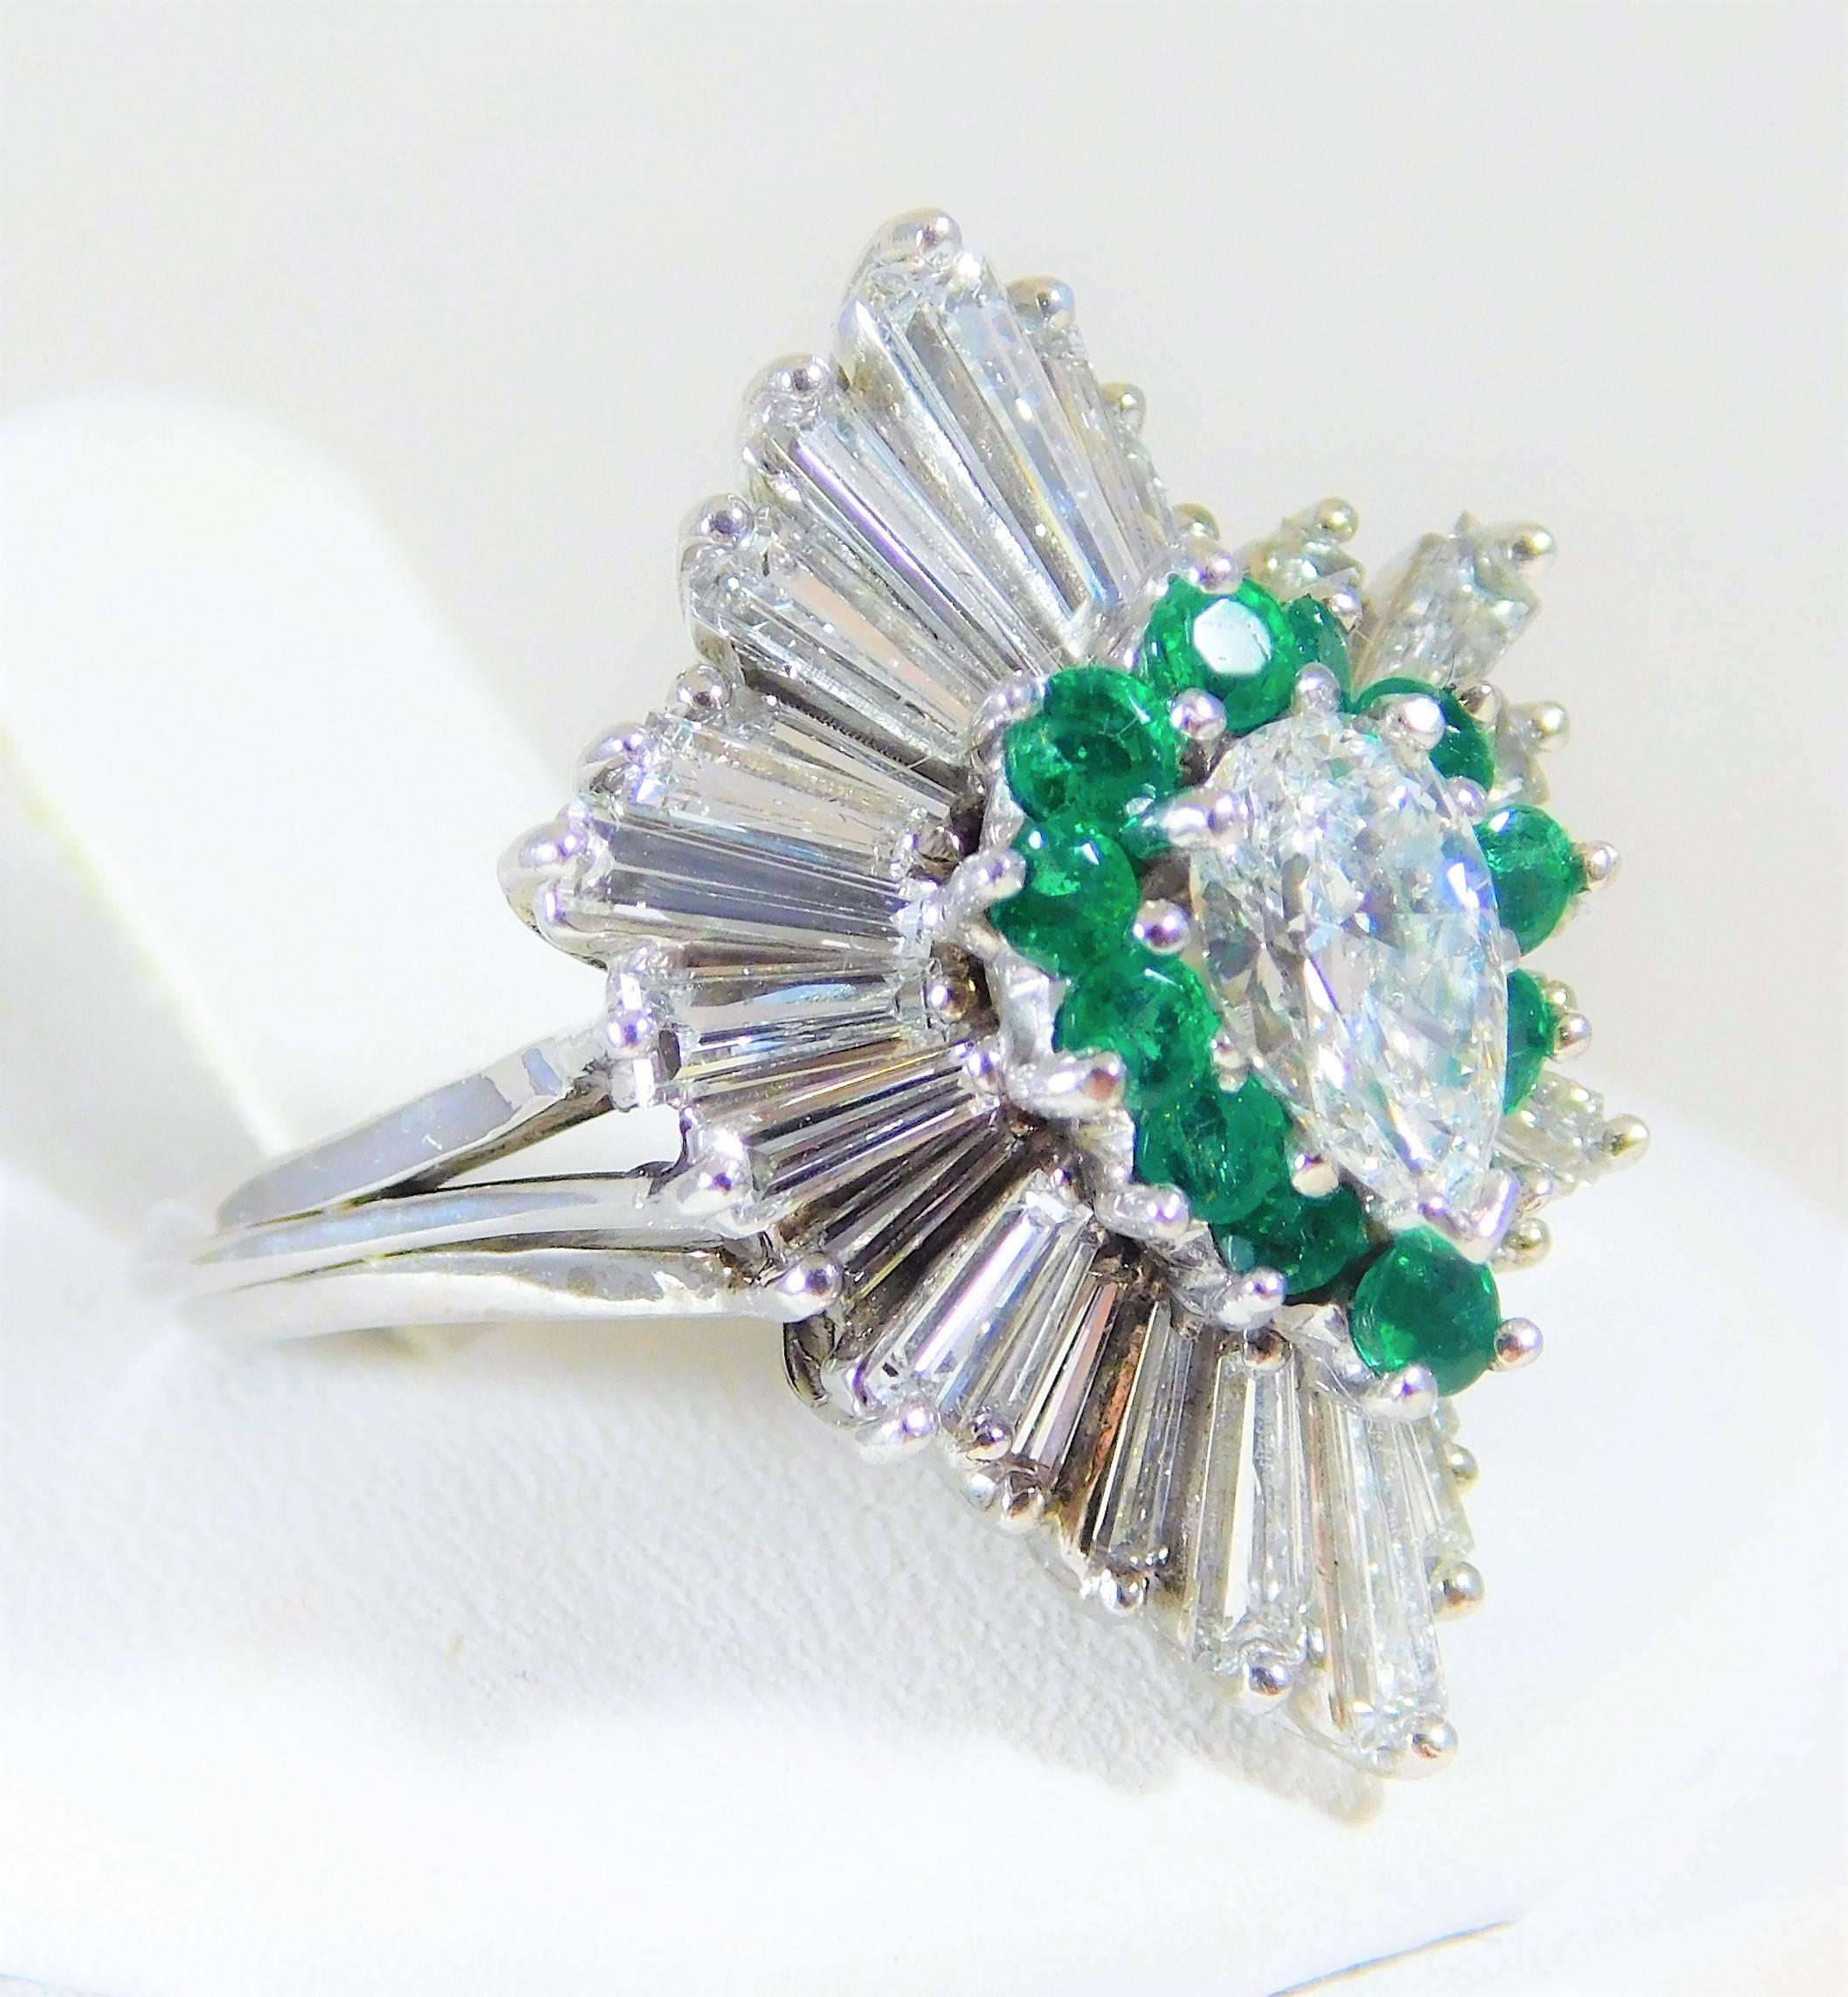 Amazing 1970s Diamond and Emerald Ballerina Ring

This gorgeous ring is made of solid 18k .  Surrounding its outer boarder, it is masterfully jeweled with 3 carats of dazzling baguette diamonds giving it that very desired ballerina style appearance.